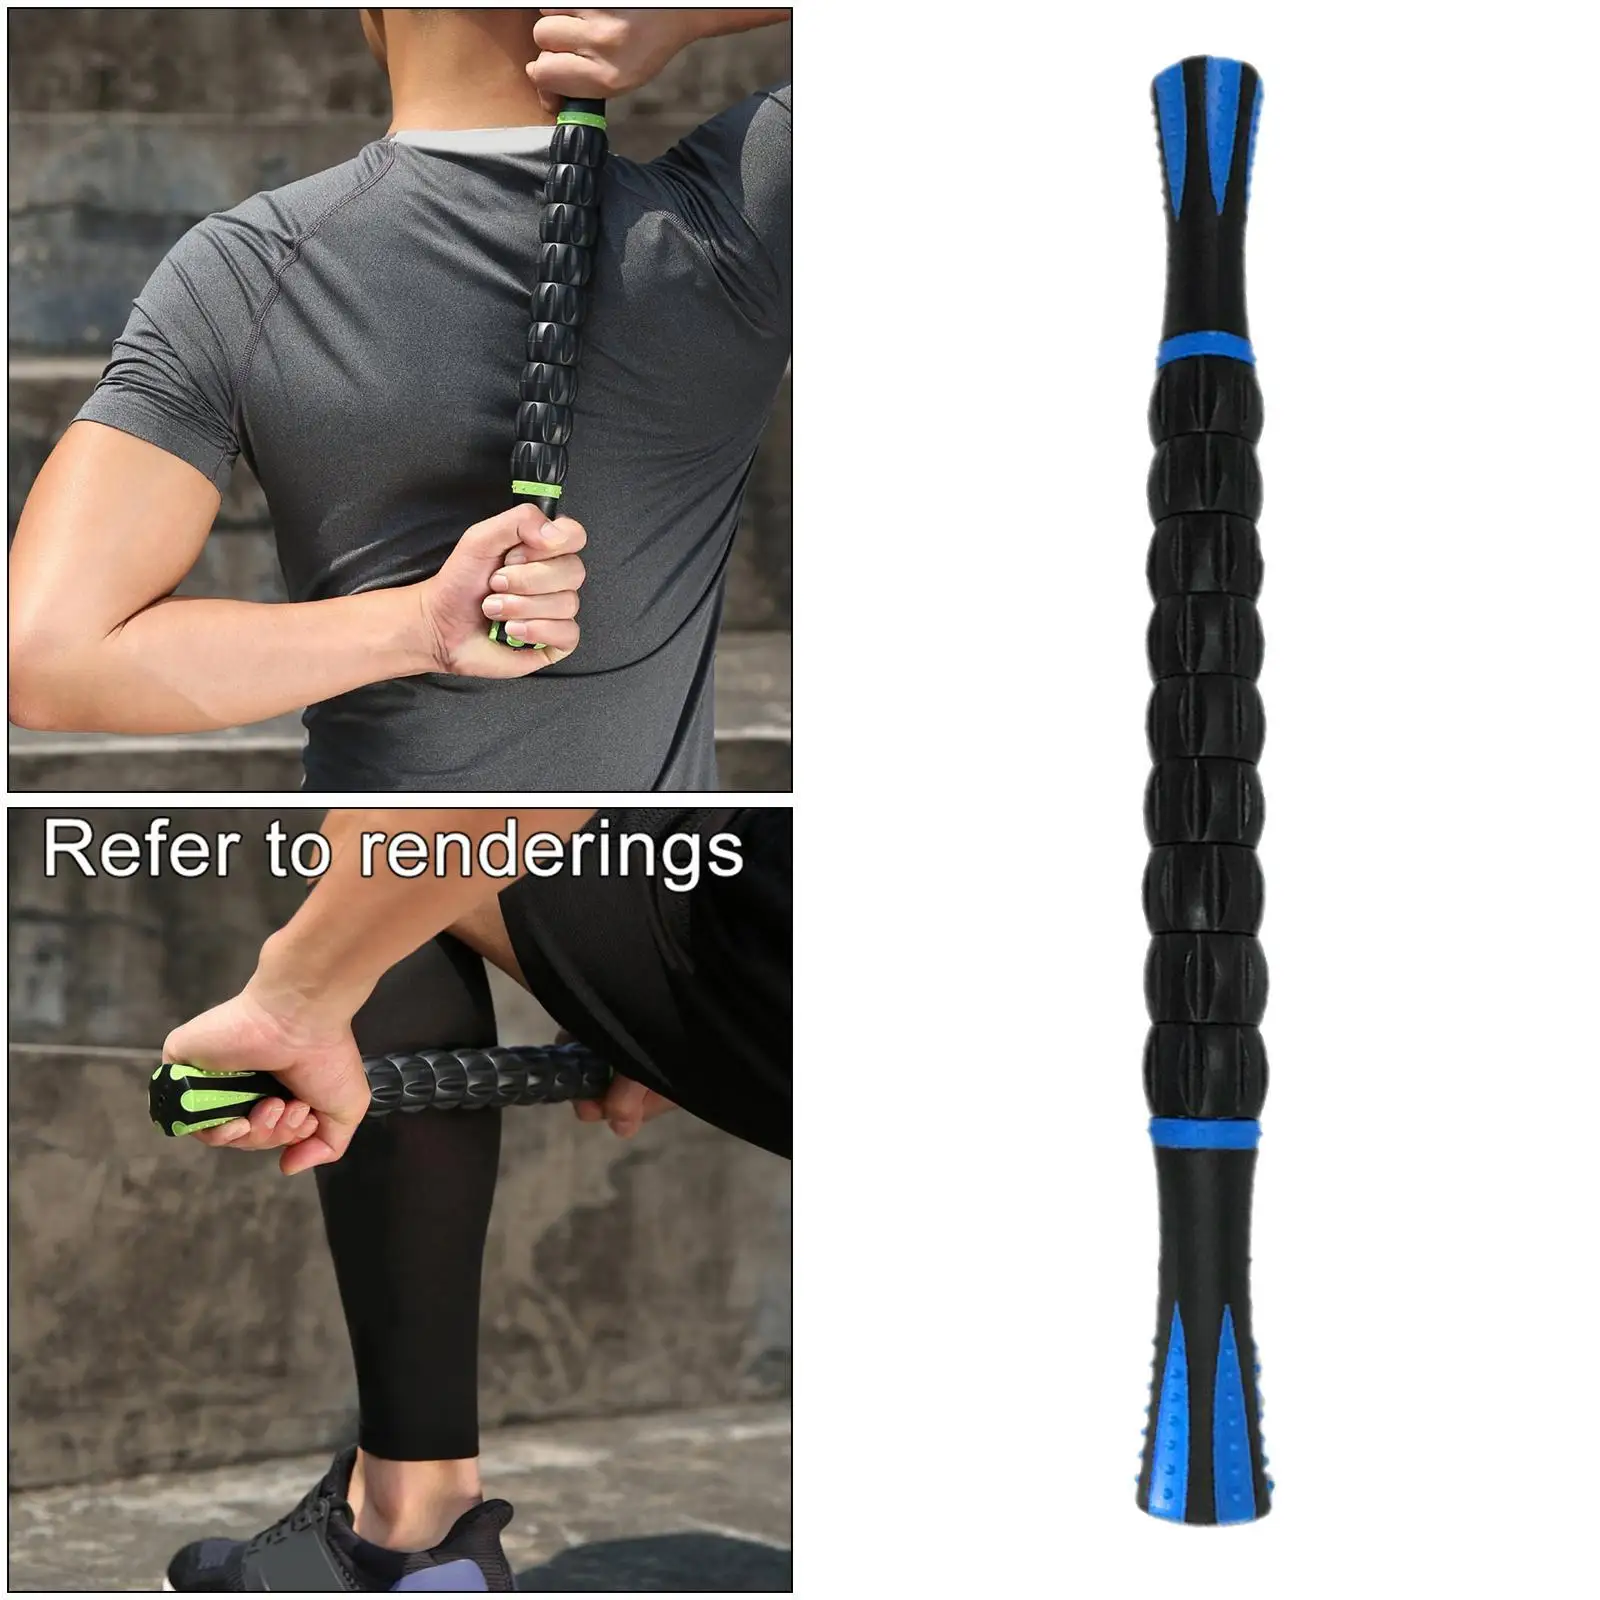 Back Leg Stick for Athletes 17 Inches Fitness Physical